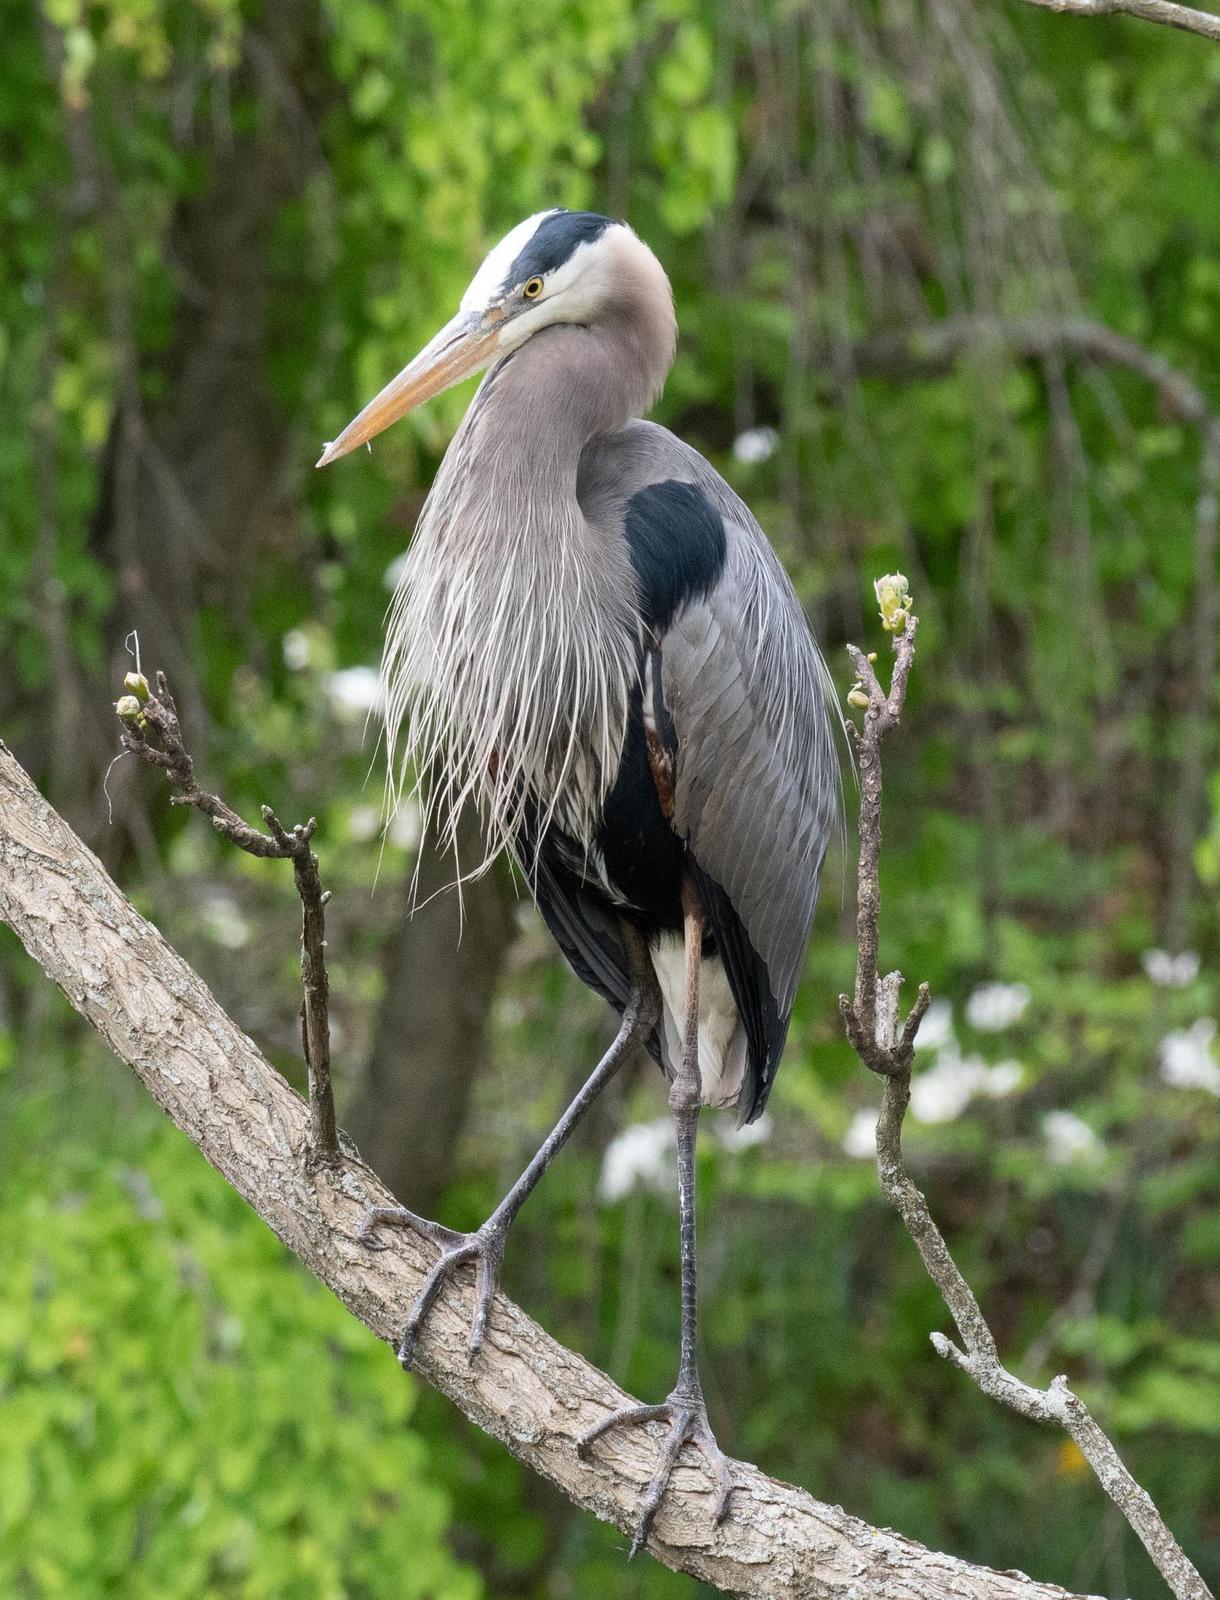 Great Blue Heron Photo by Hume Vance